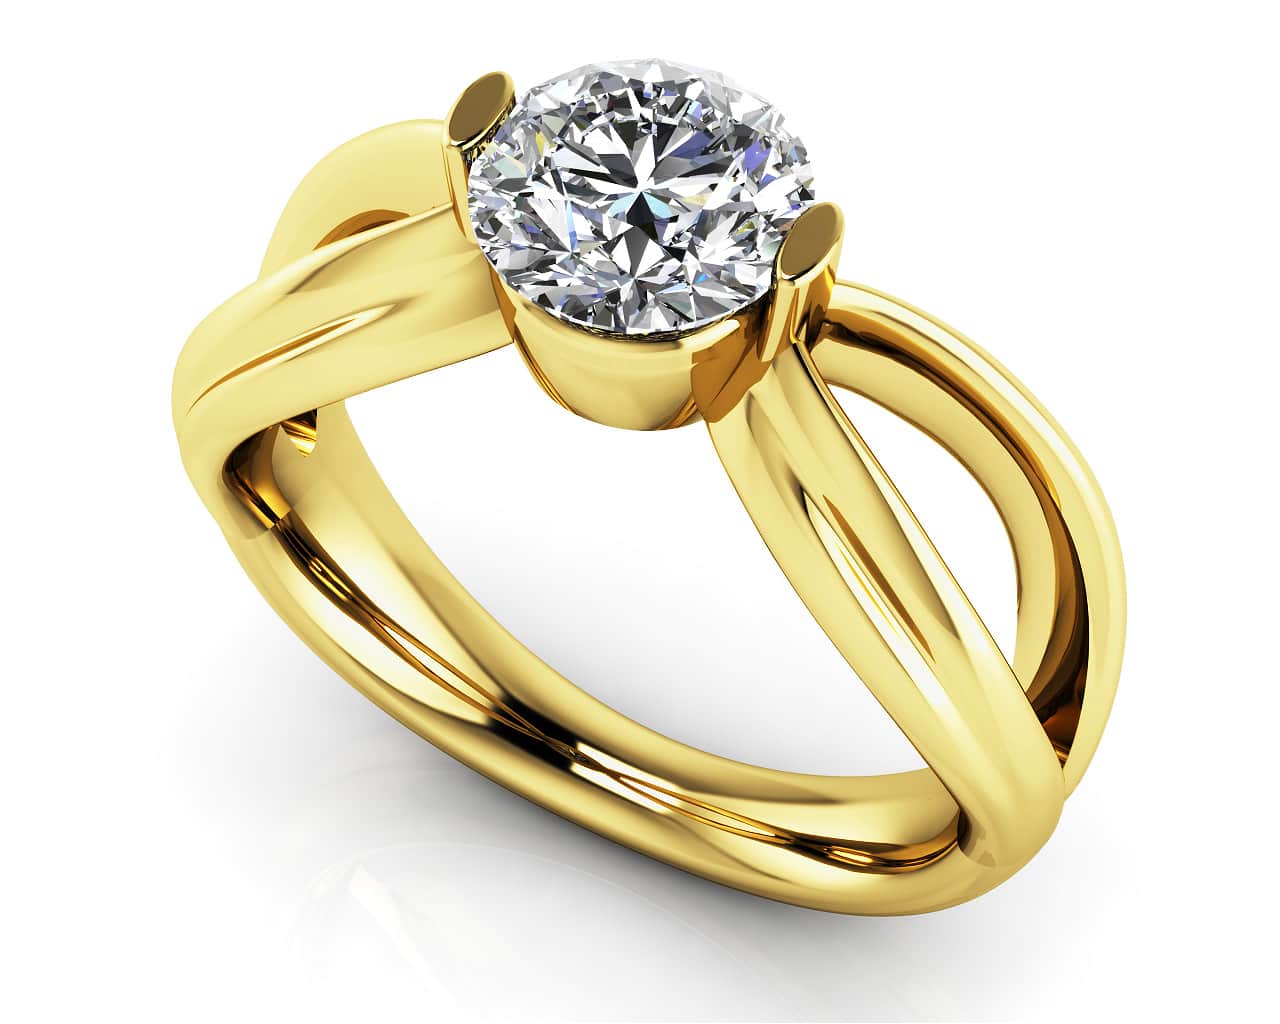 Endless Love Comfort Fit Diamond Solitaire Ring 1/2 Carat Total Weight